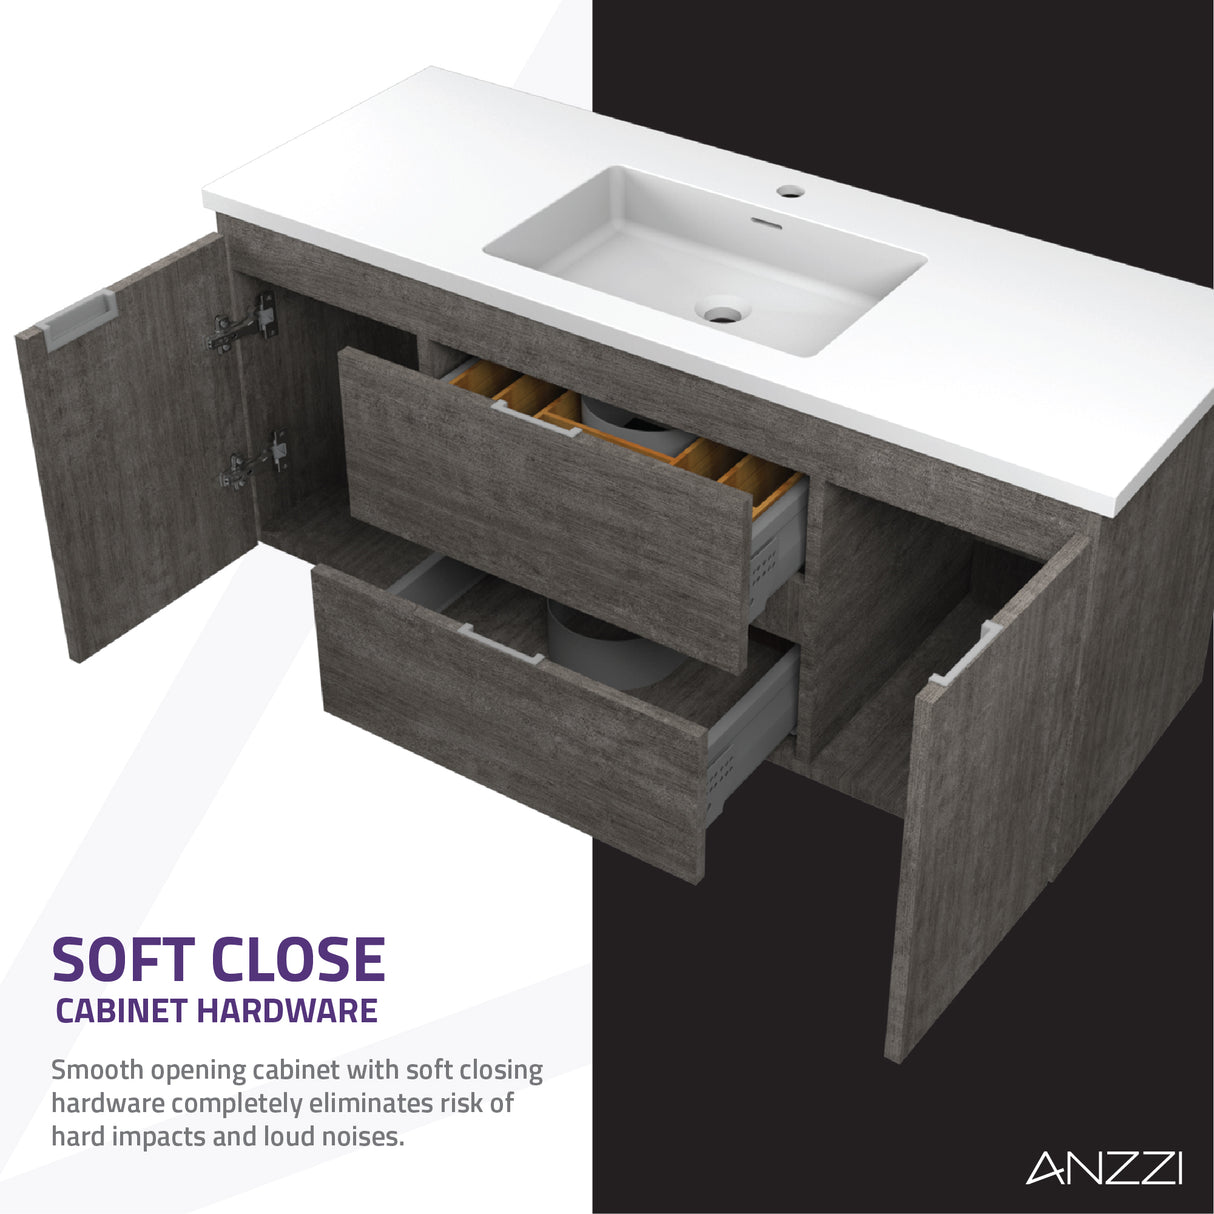 ANZZI VT-MR4SCCT48-GY 48 in. W x 20 in. H x 18 in. D Bath Vanity Set in Rich Gray with Vanity Top in White with White Basin and Mirror